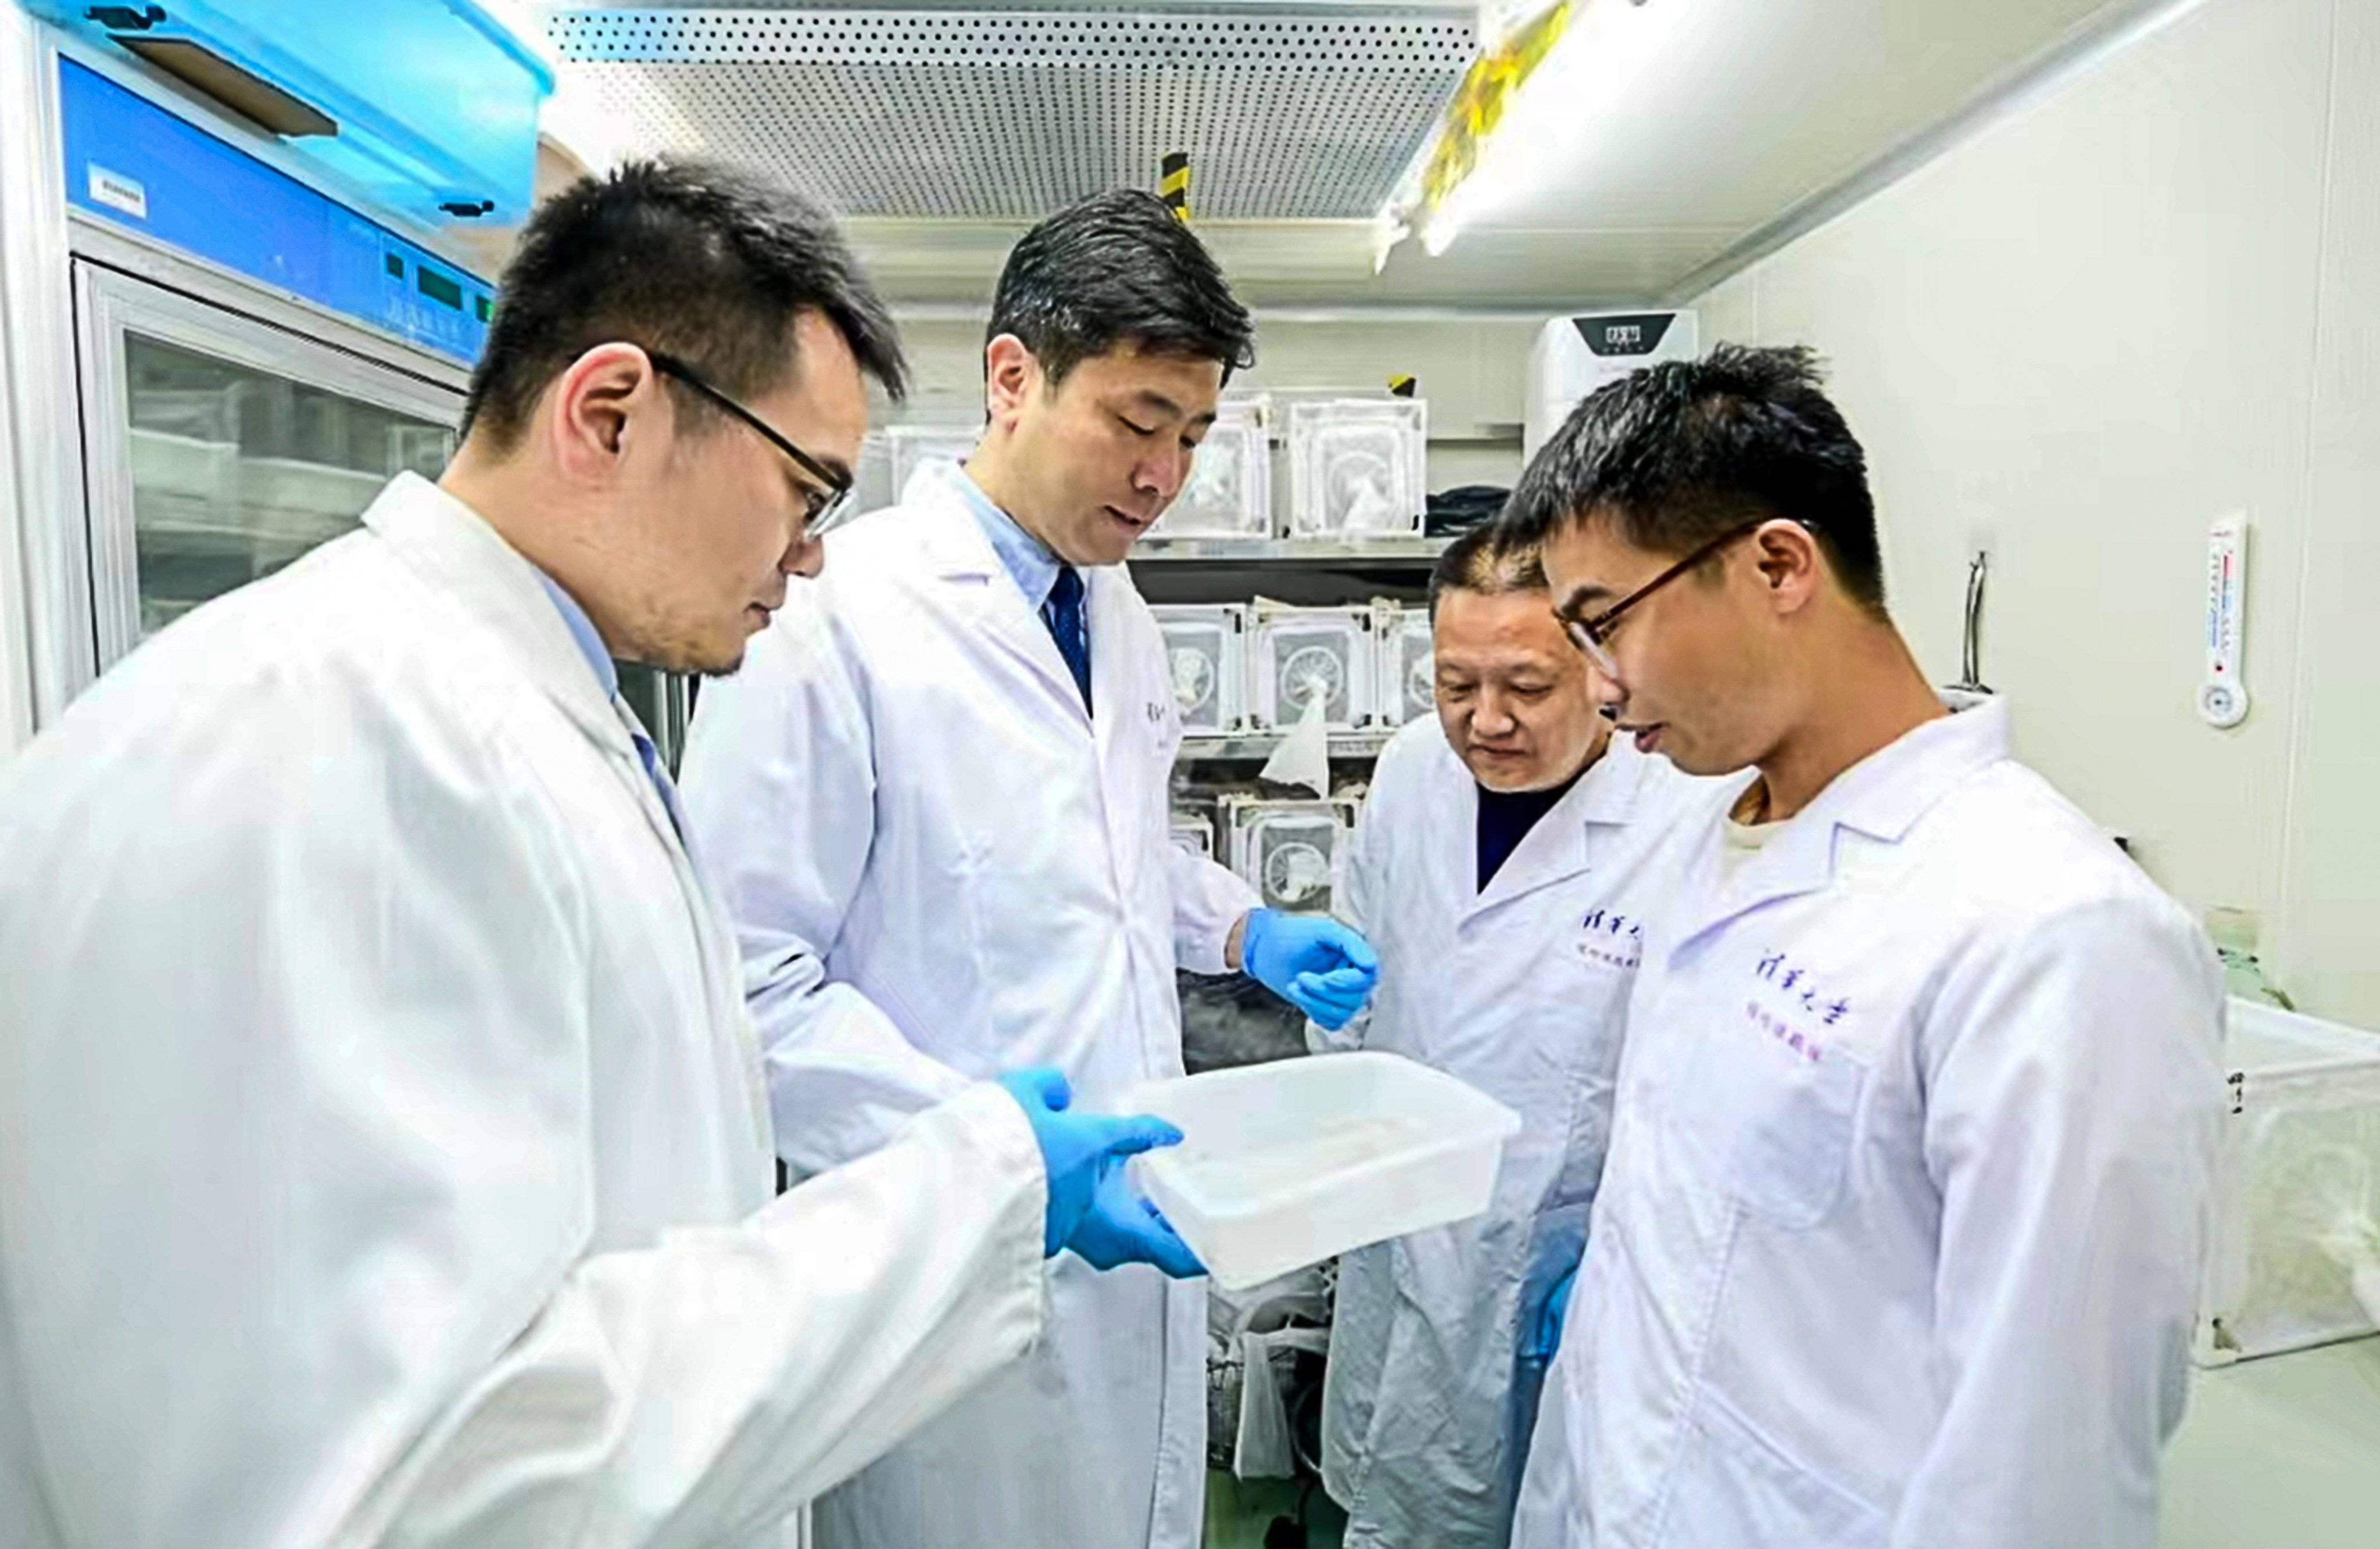 A team of Chinese scientists  led by Cheng Gong (second from left) says it has identified a gut bacteria from mosquitoes that could prevent them from being infected by viruses, including dengue and Zika. Photo: Handout